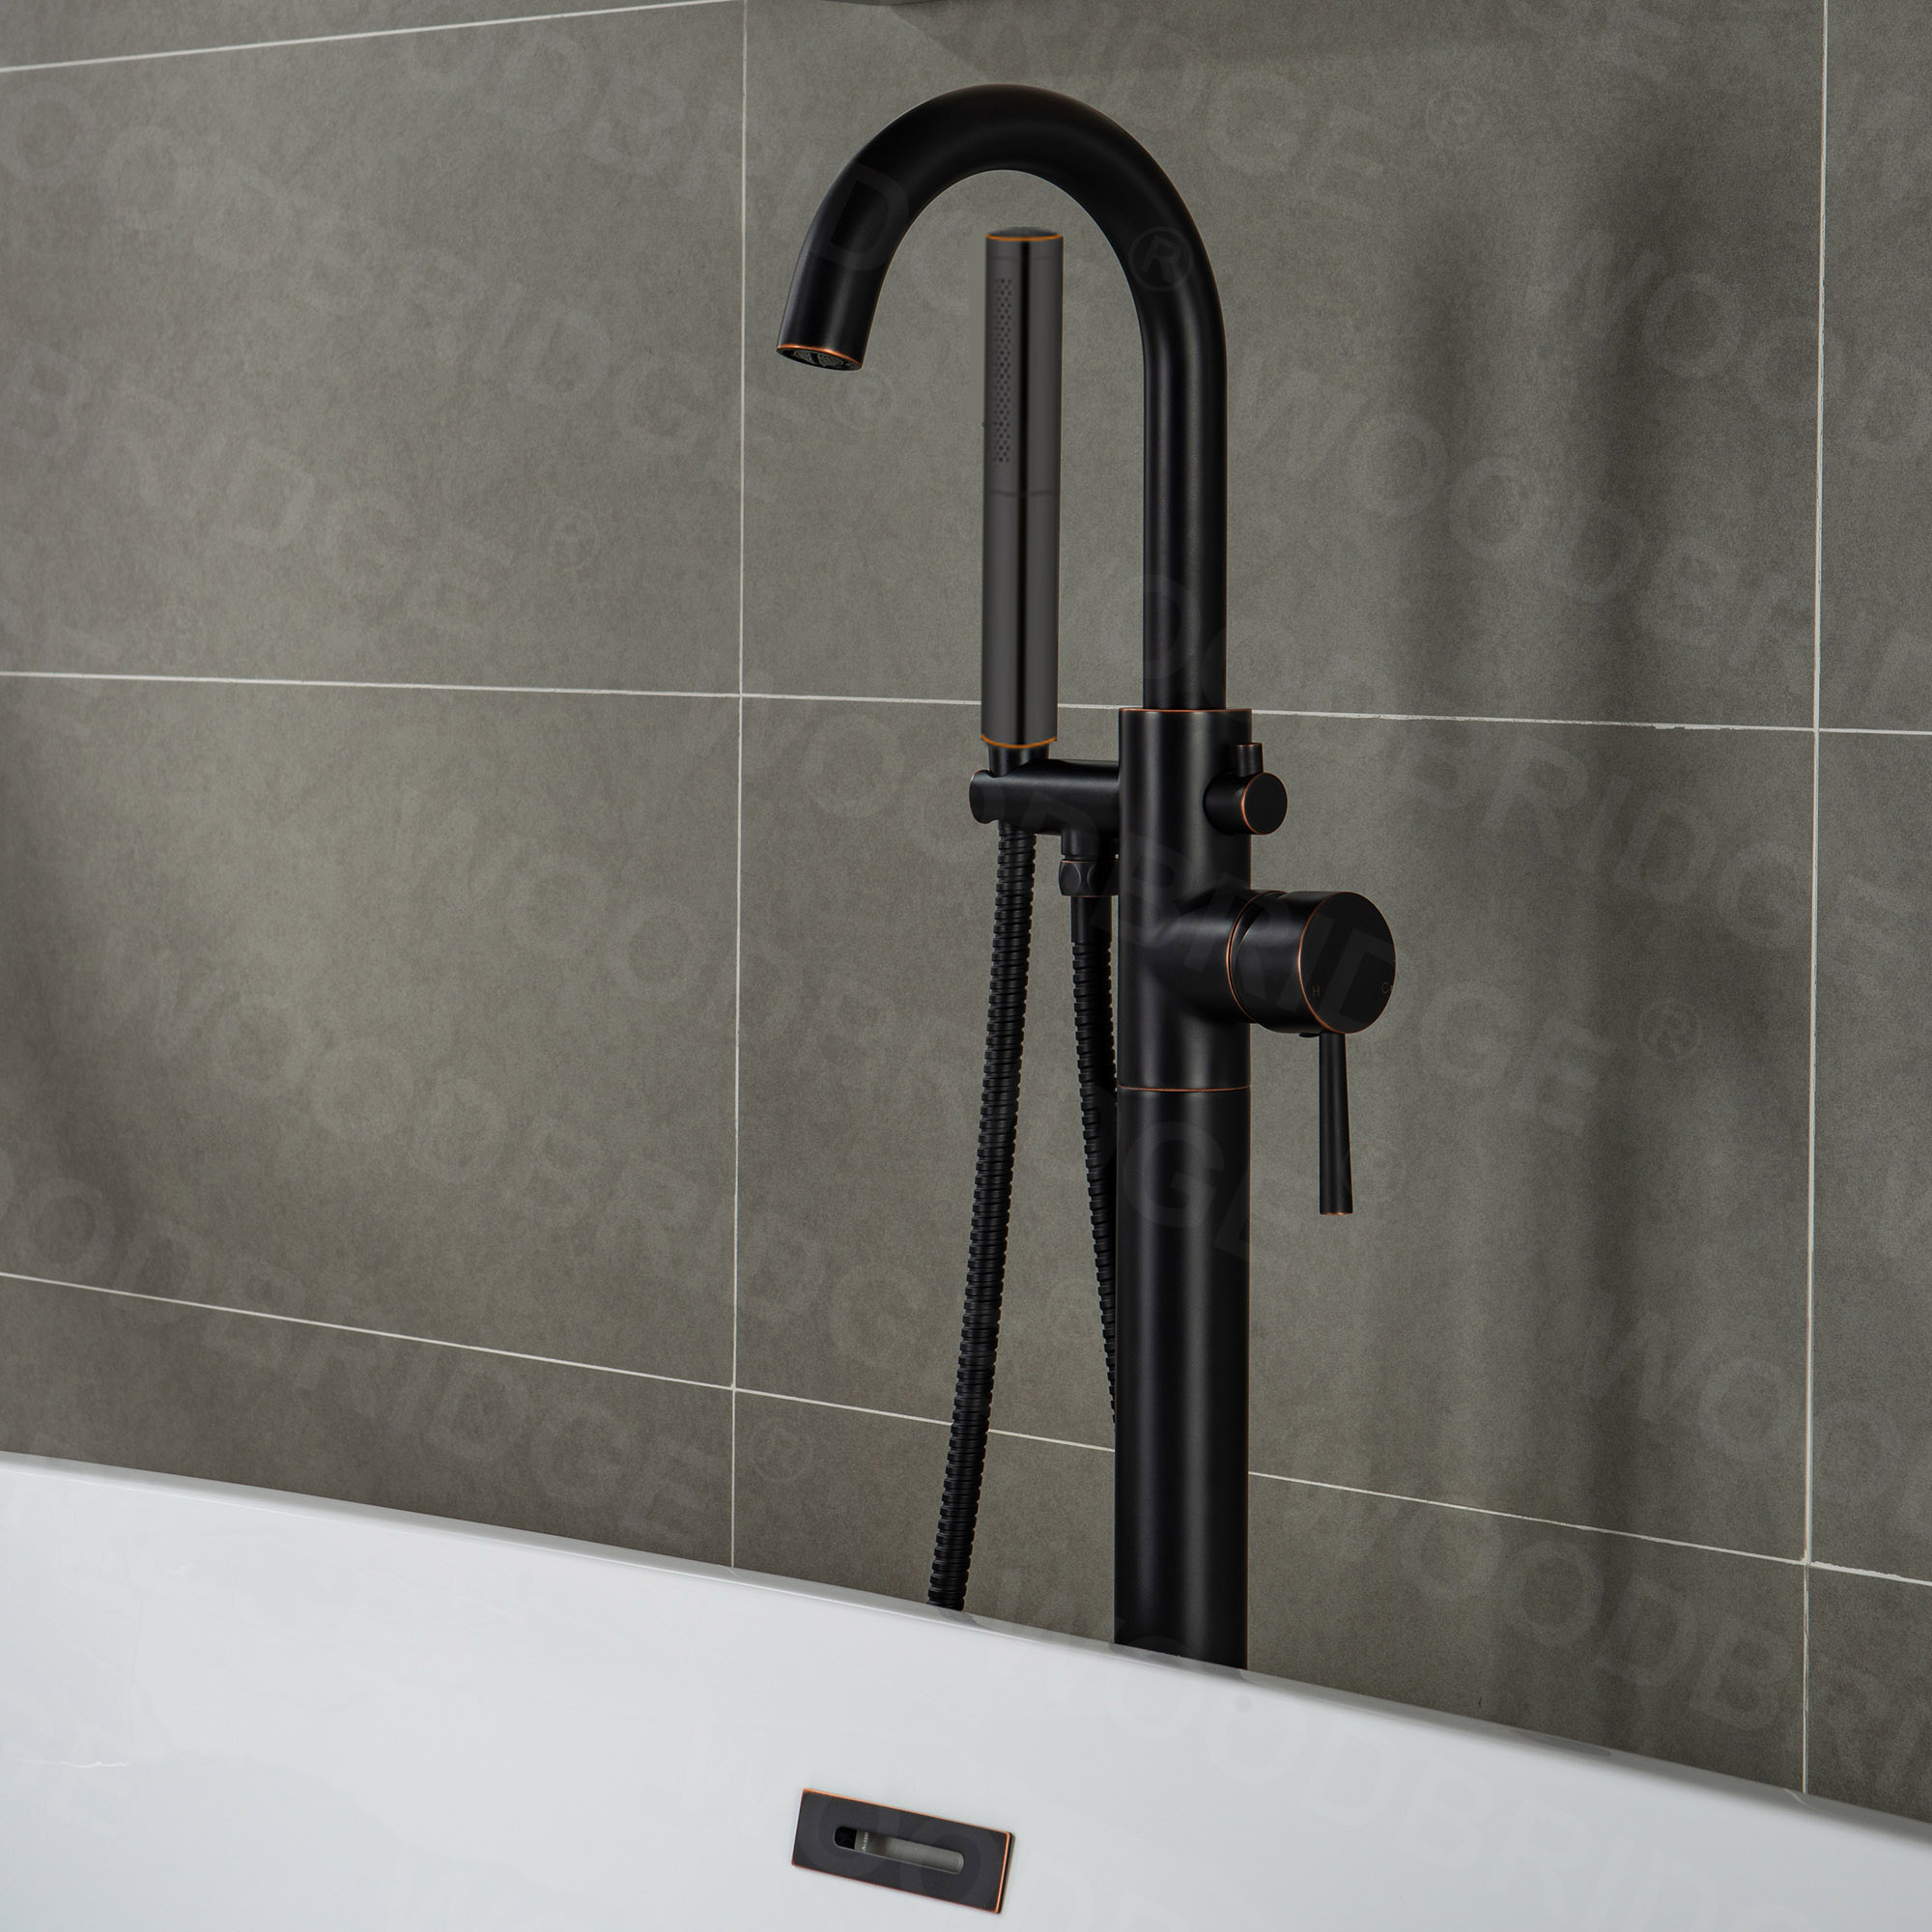  WOODBRIDGE F0010ORBDR Contemporary Single Handle Floor Mount Freestanding Tub Filler Faucet with Hand shower in Oil Rubbed Bronze Finish._14269